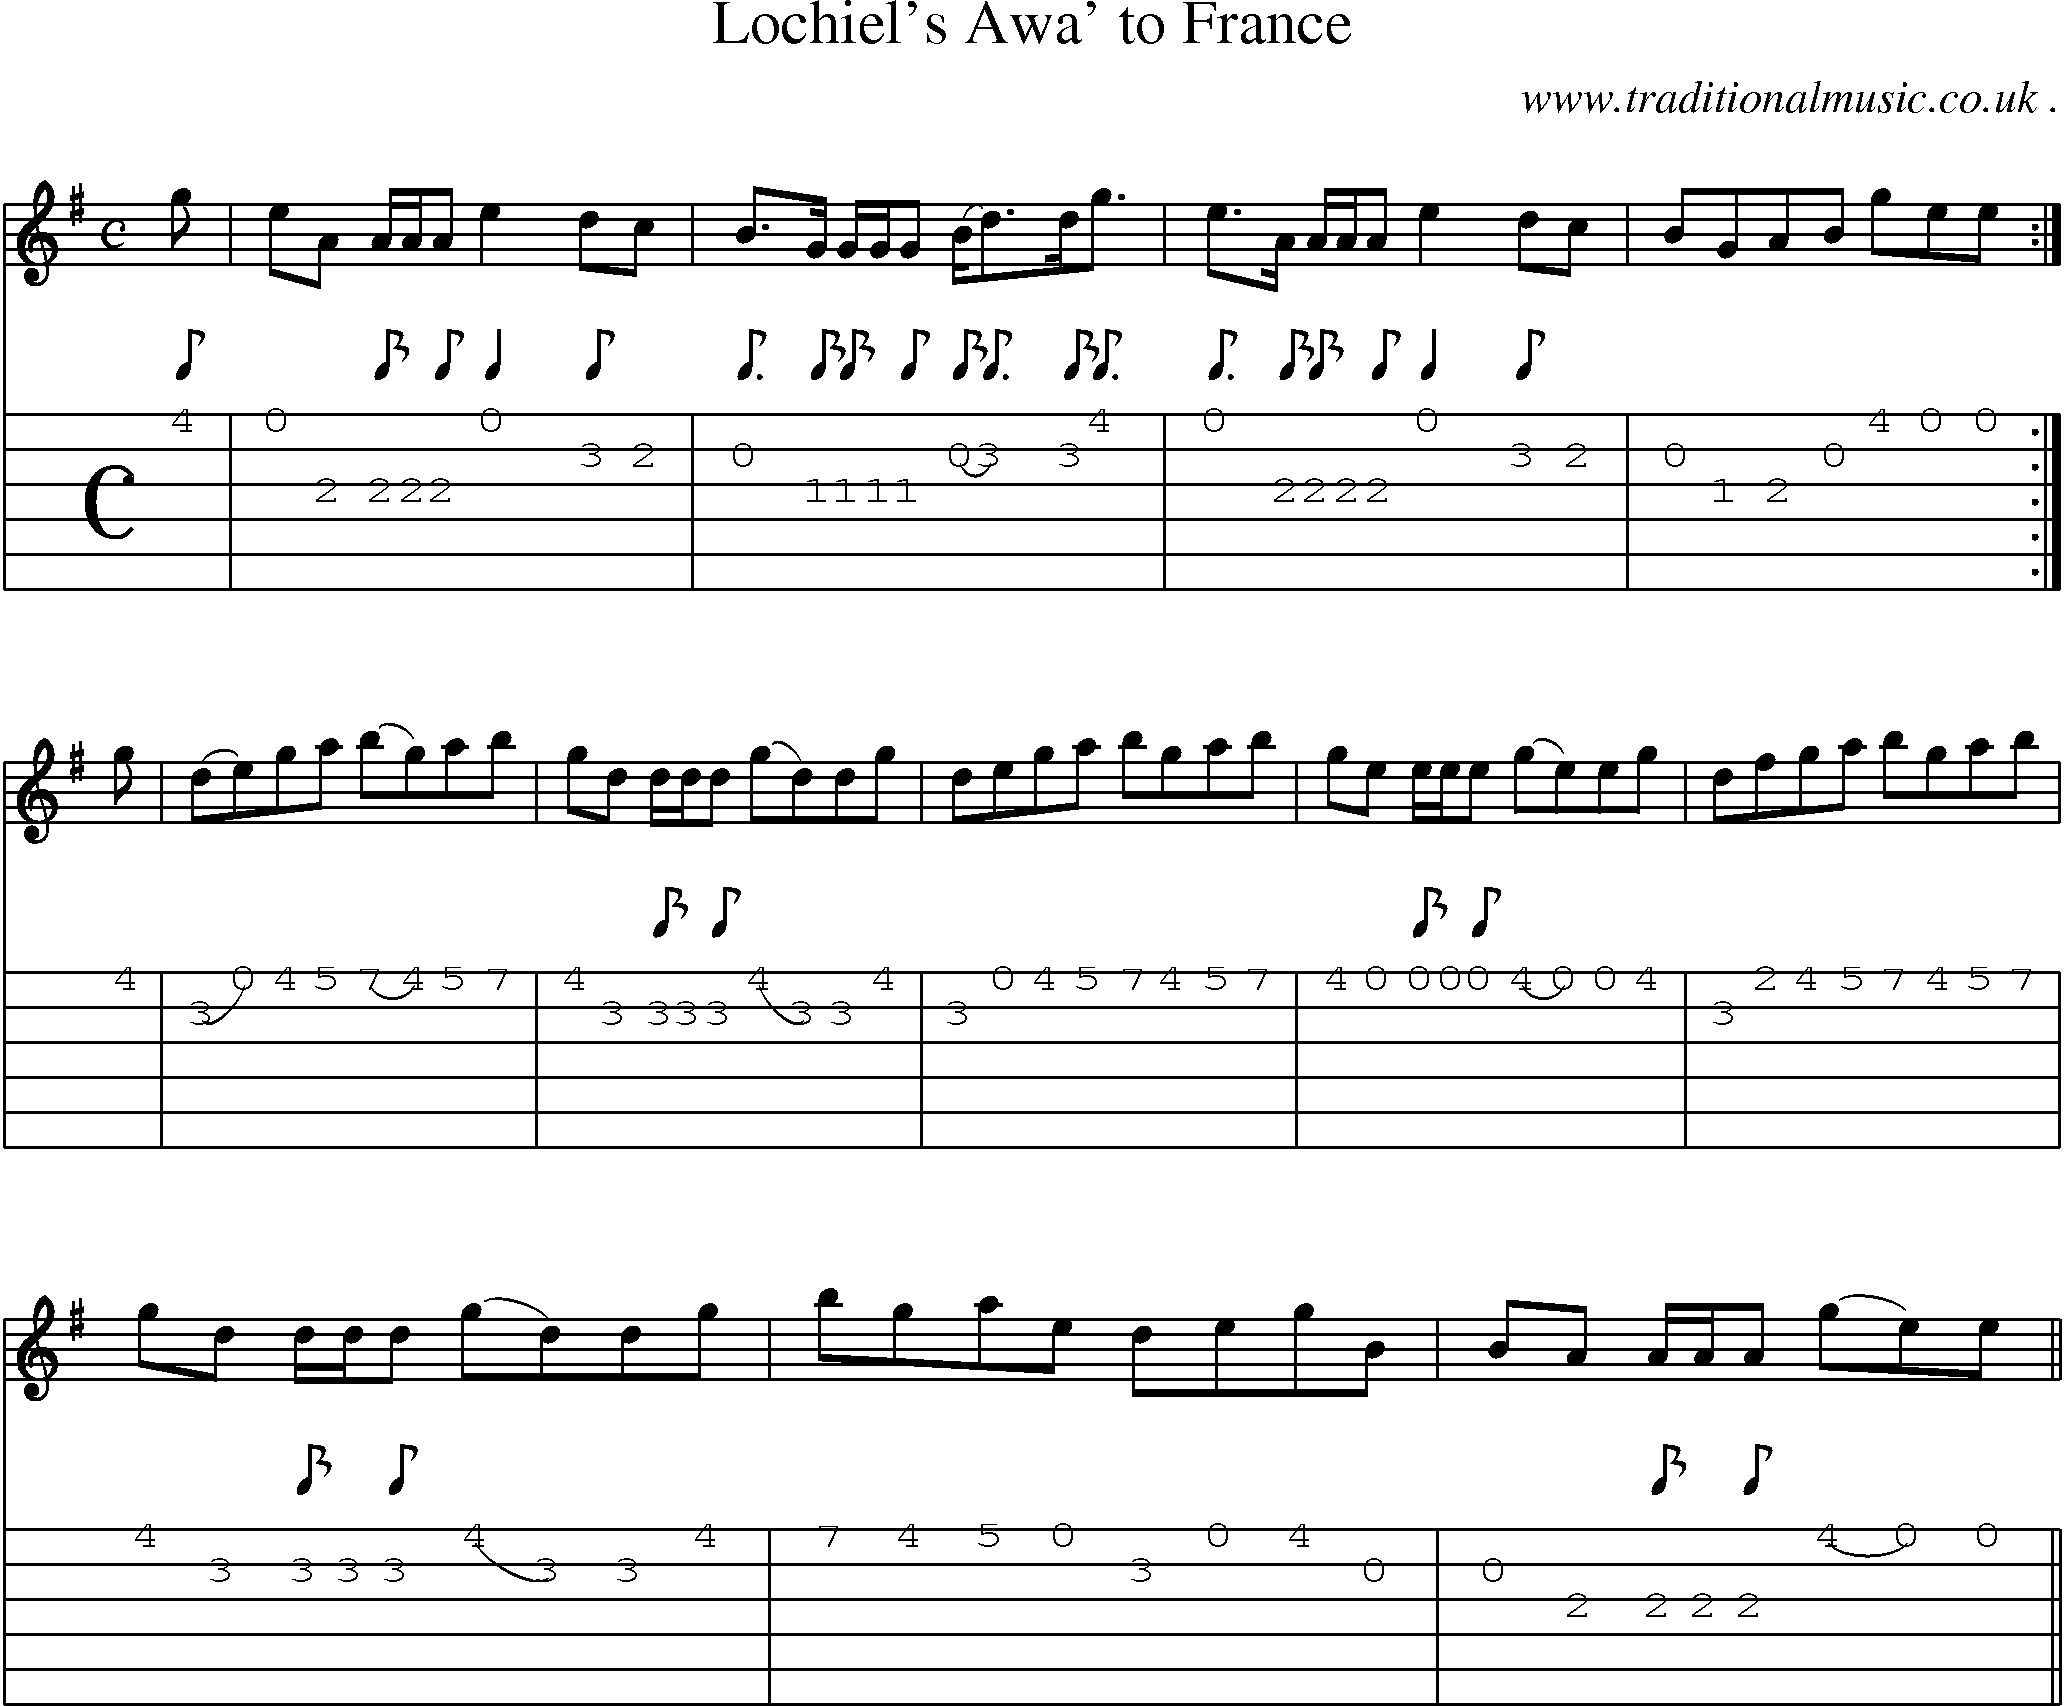 Sheet-music  score, Chords and Guitar Tabs for Lochiels Awa To France